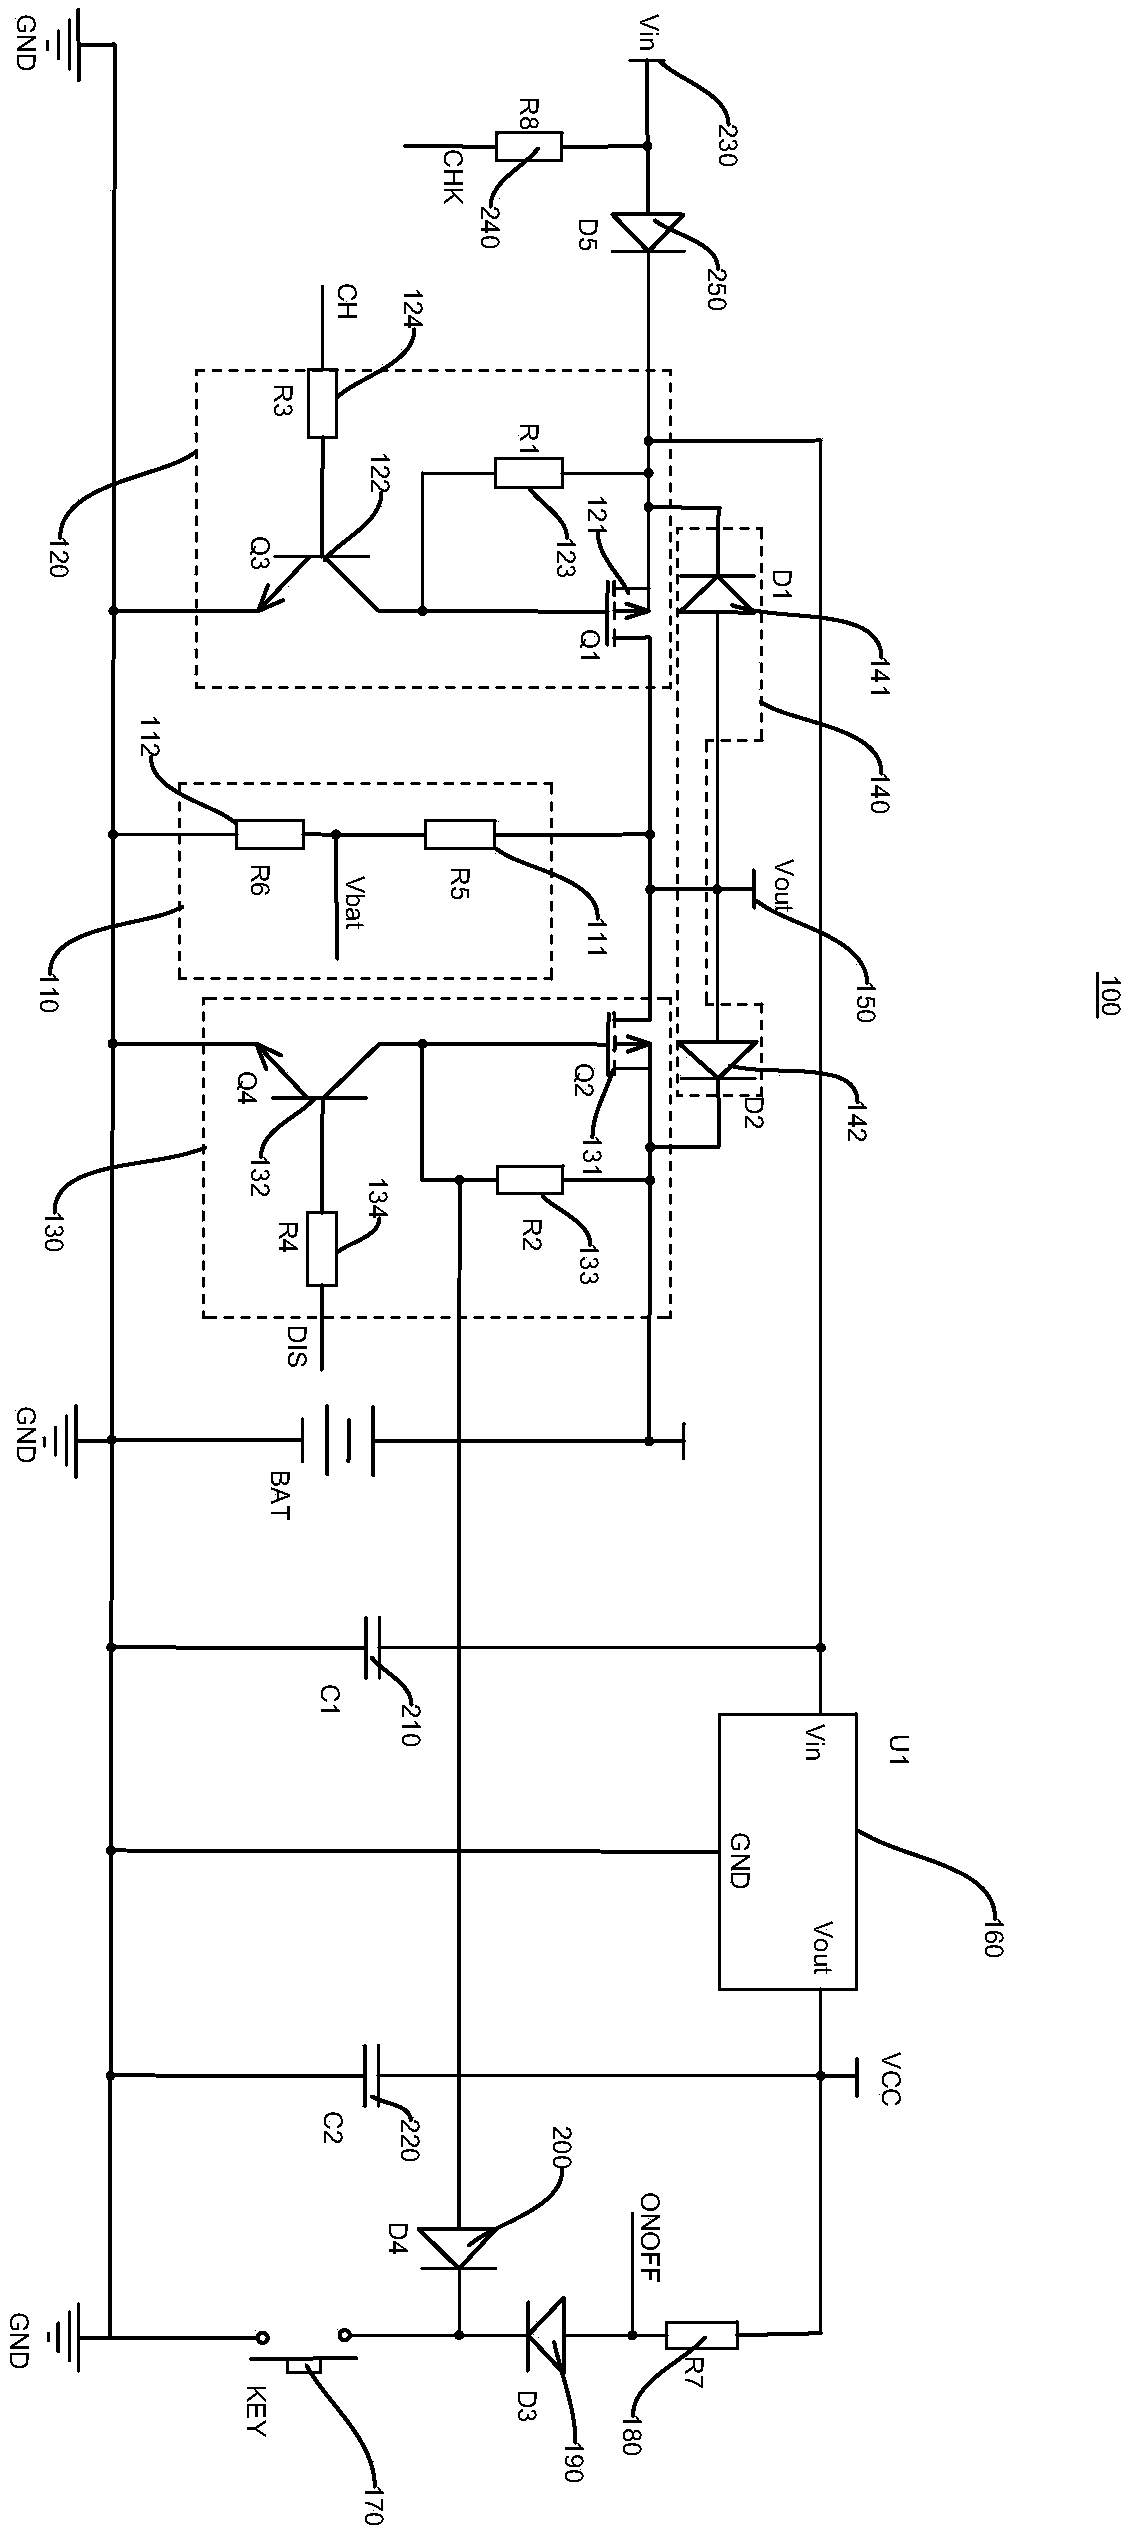 Battery power supply circuit